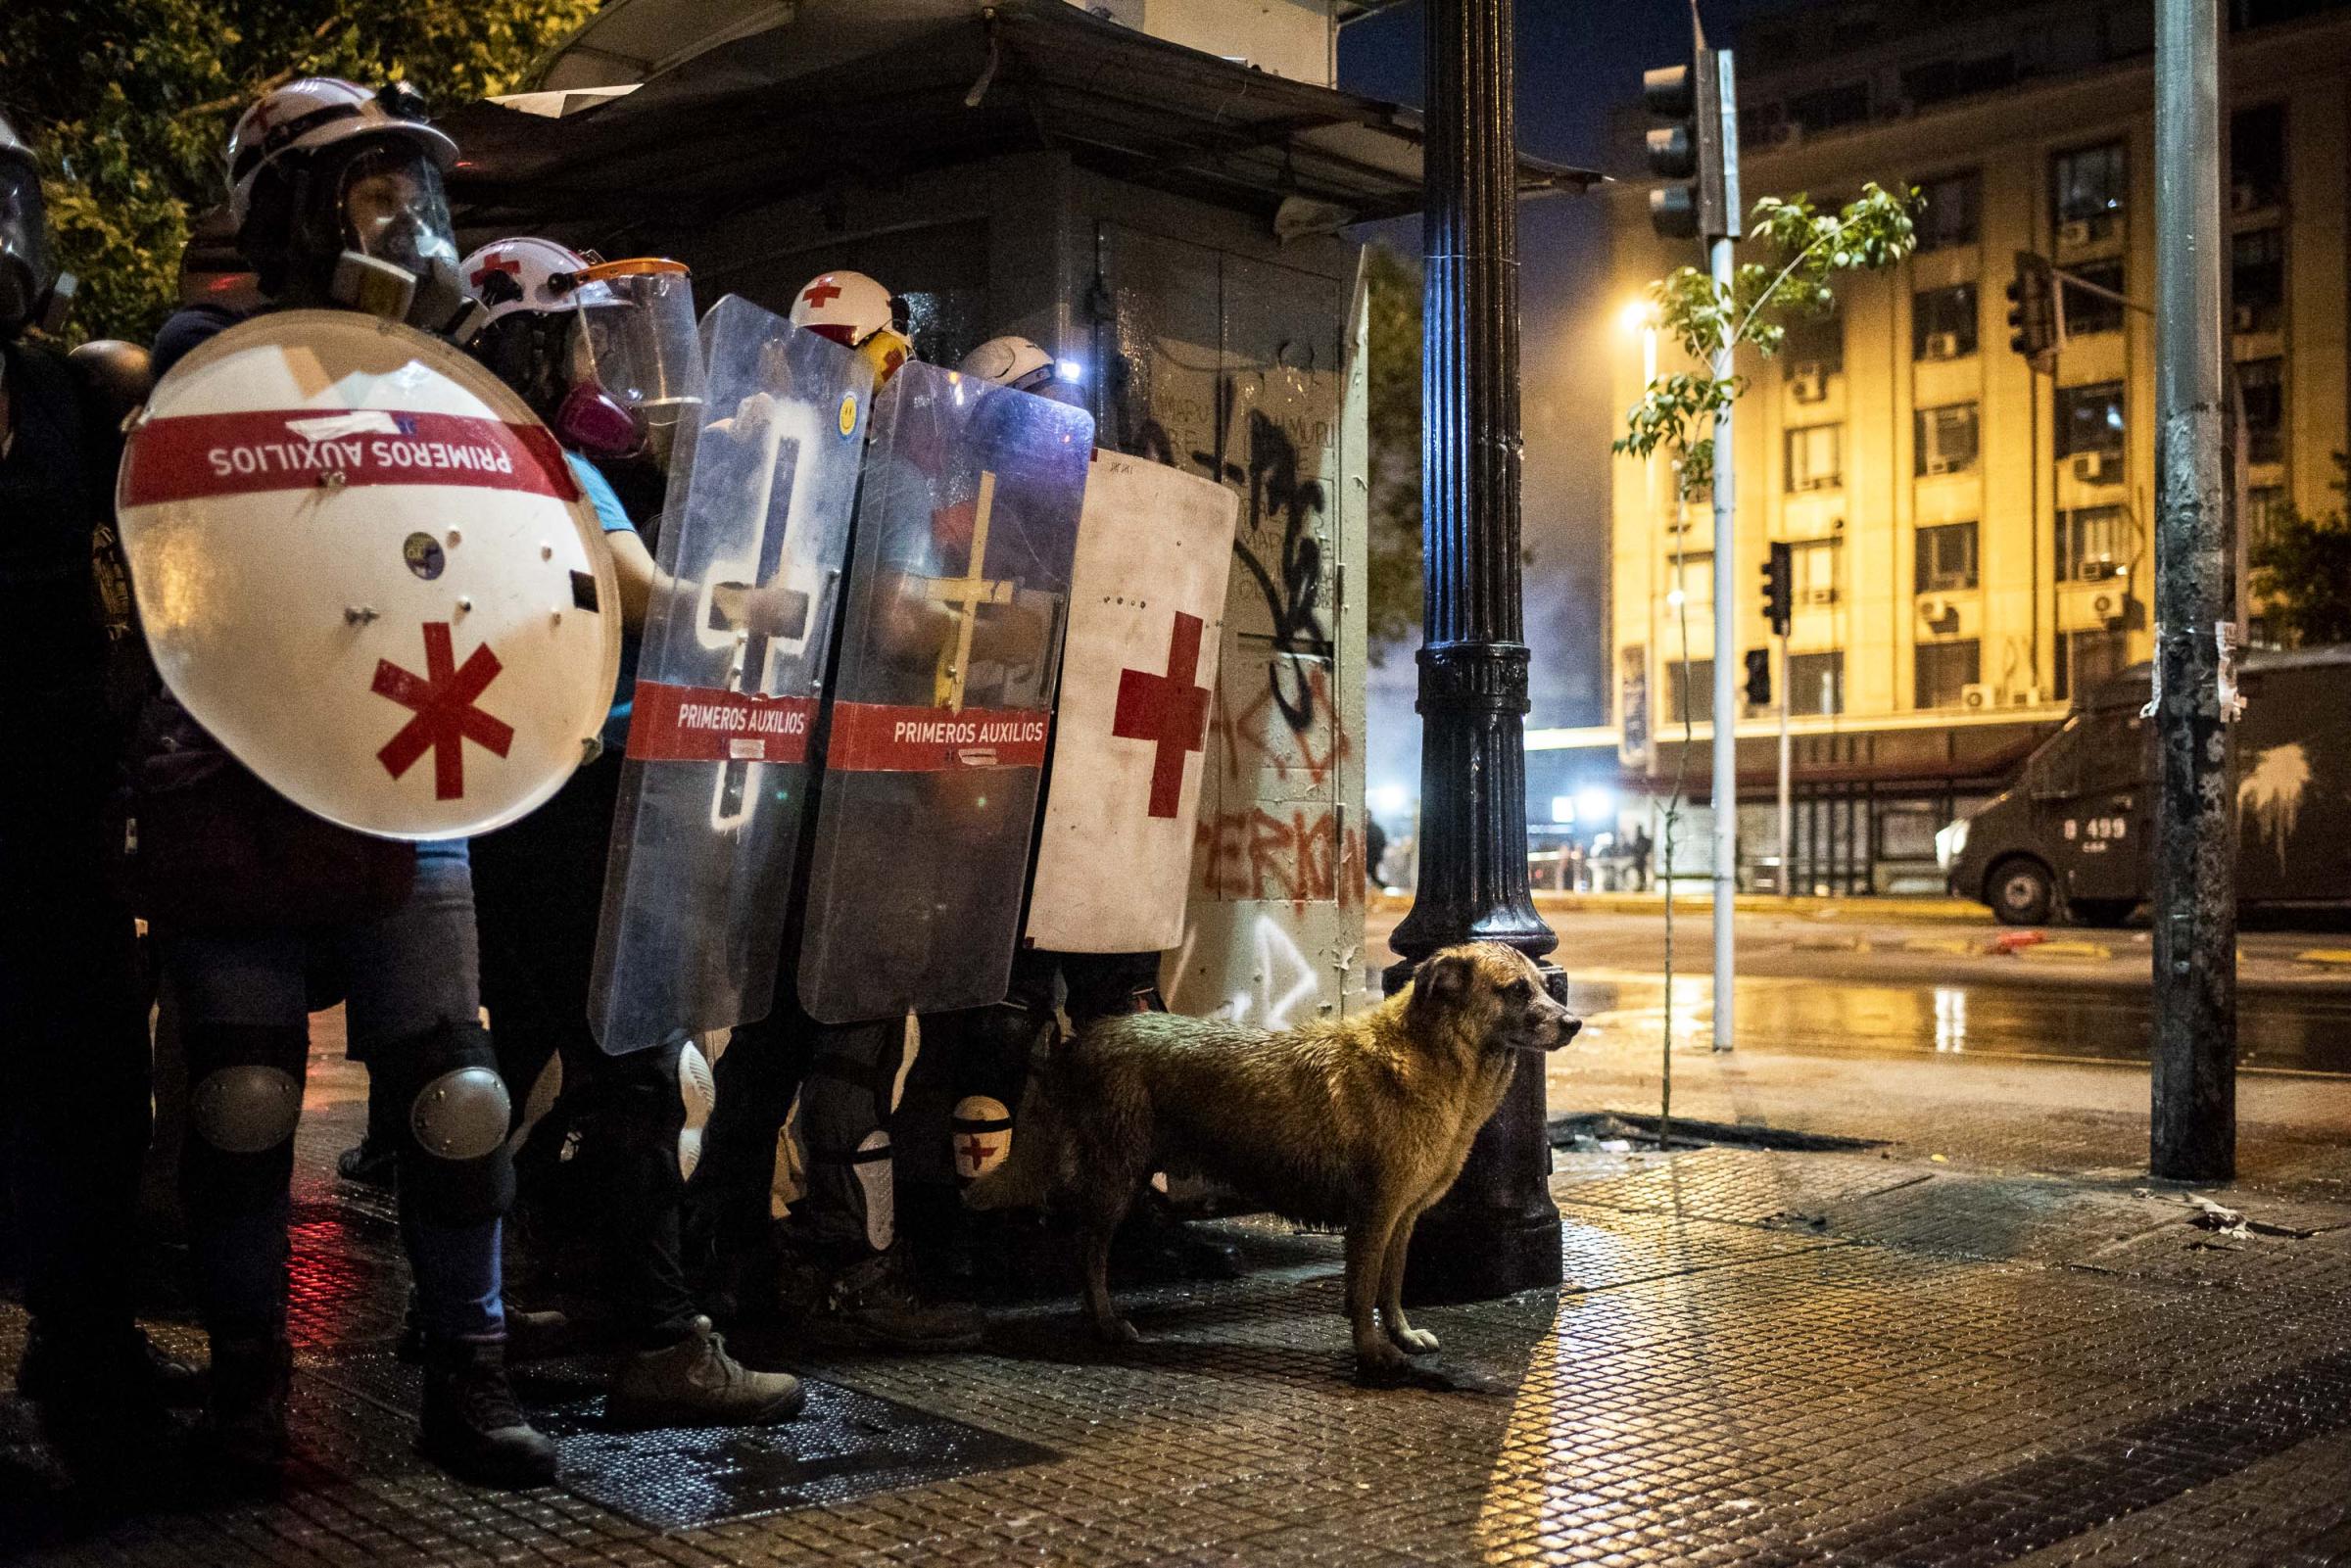 CHILE: From politics to social unrest.